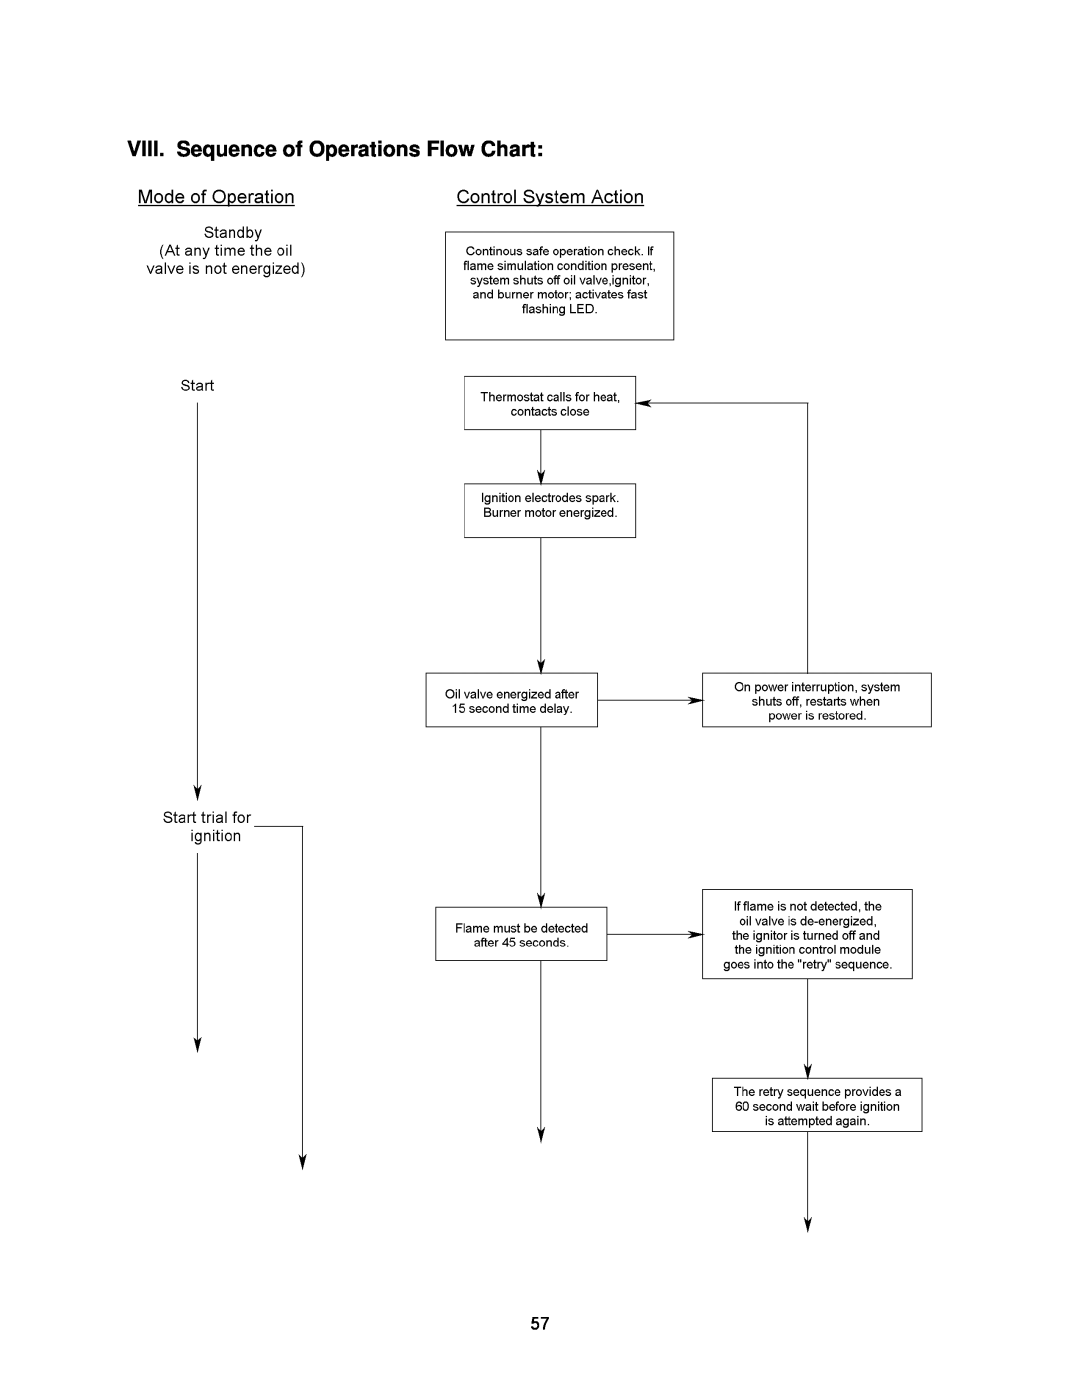 Thermo Products OL6FA072DV5(B/R), OL6RA072D48(B/R), OL6FA072D48(B/R), OL6RX072DV5(R) VIII. Sequence of Operations Flow Chart 